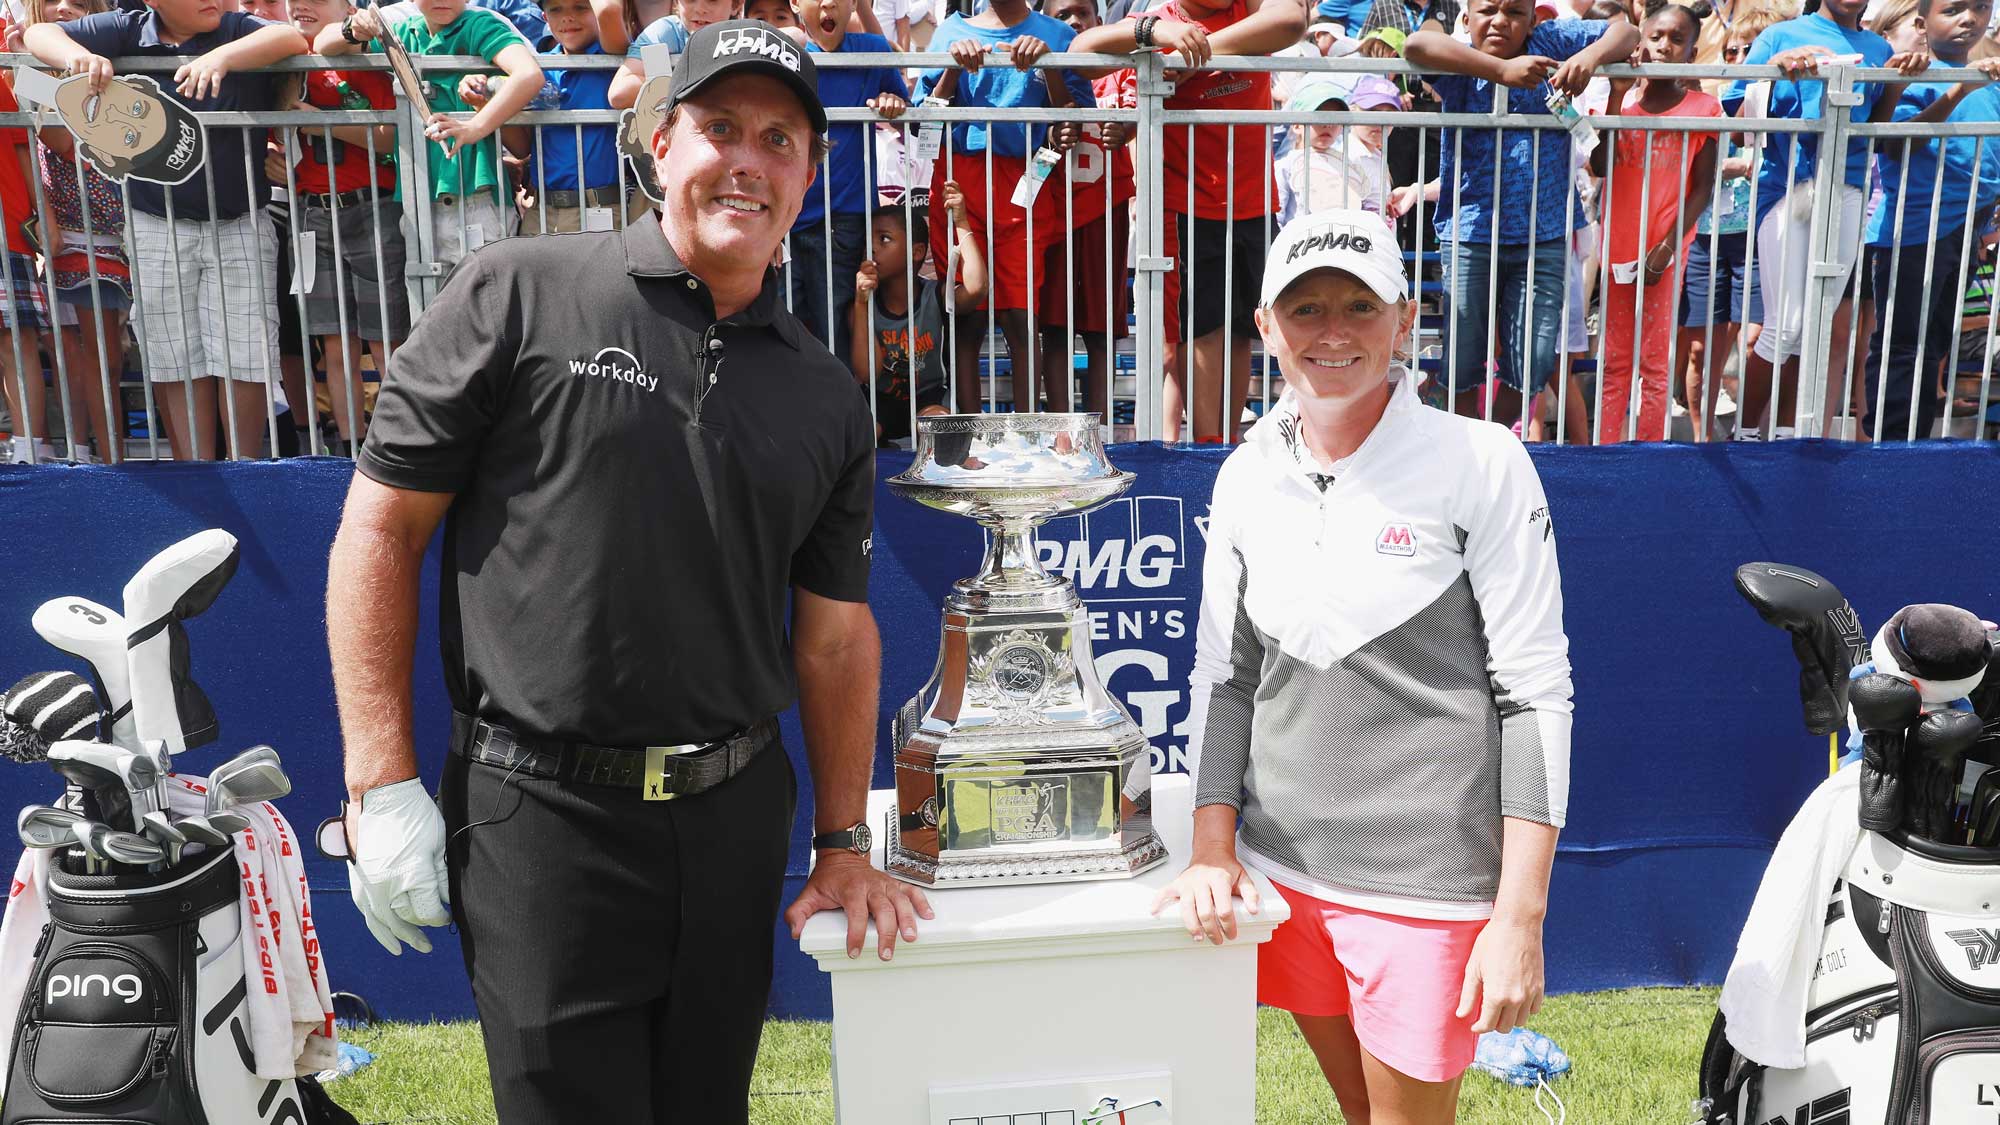 Phil Mickelson (L) and Stacy Lewis pose together during a a skills challenge prior to the start of the 2017 KPMG Women's PGA Championship